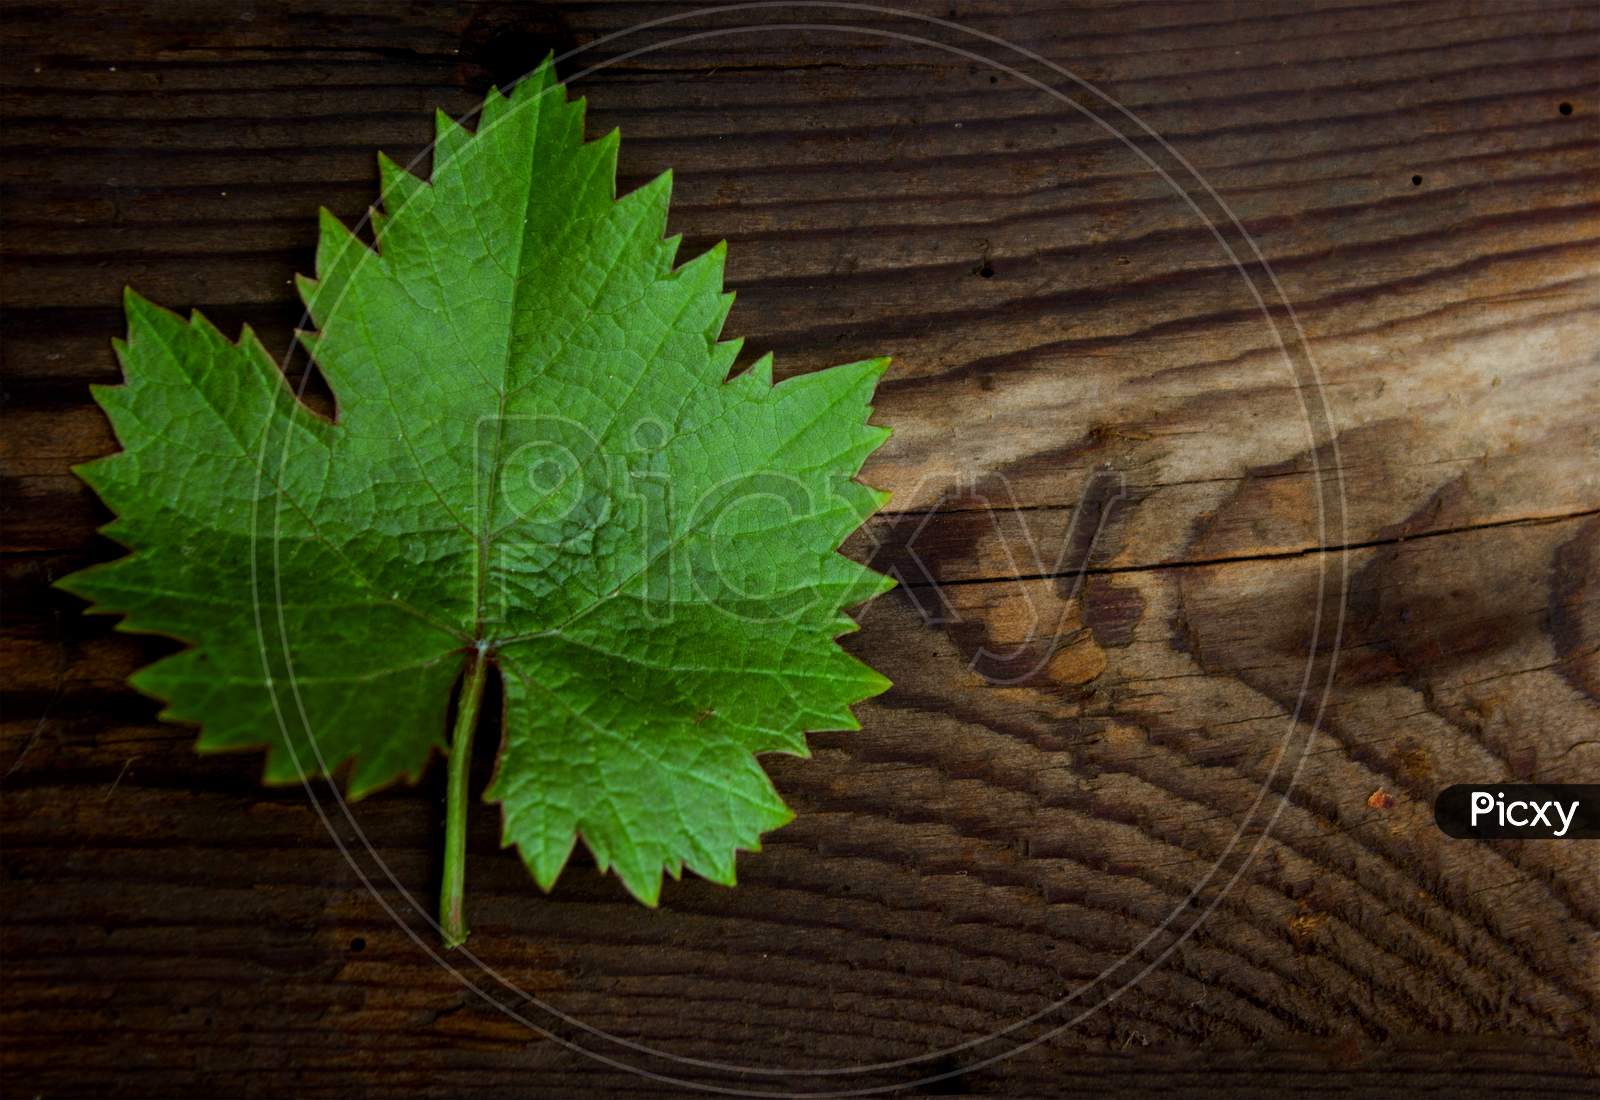 A Green leaf on a Wooden Background